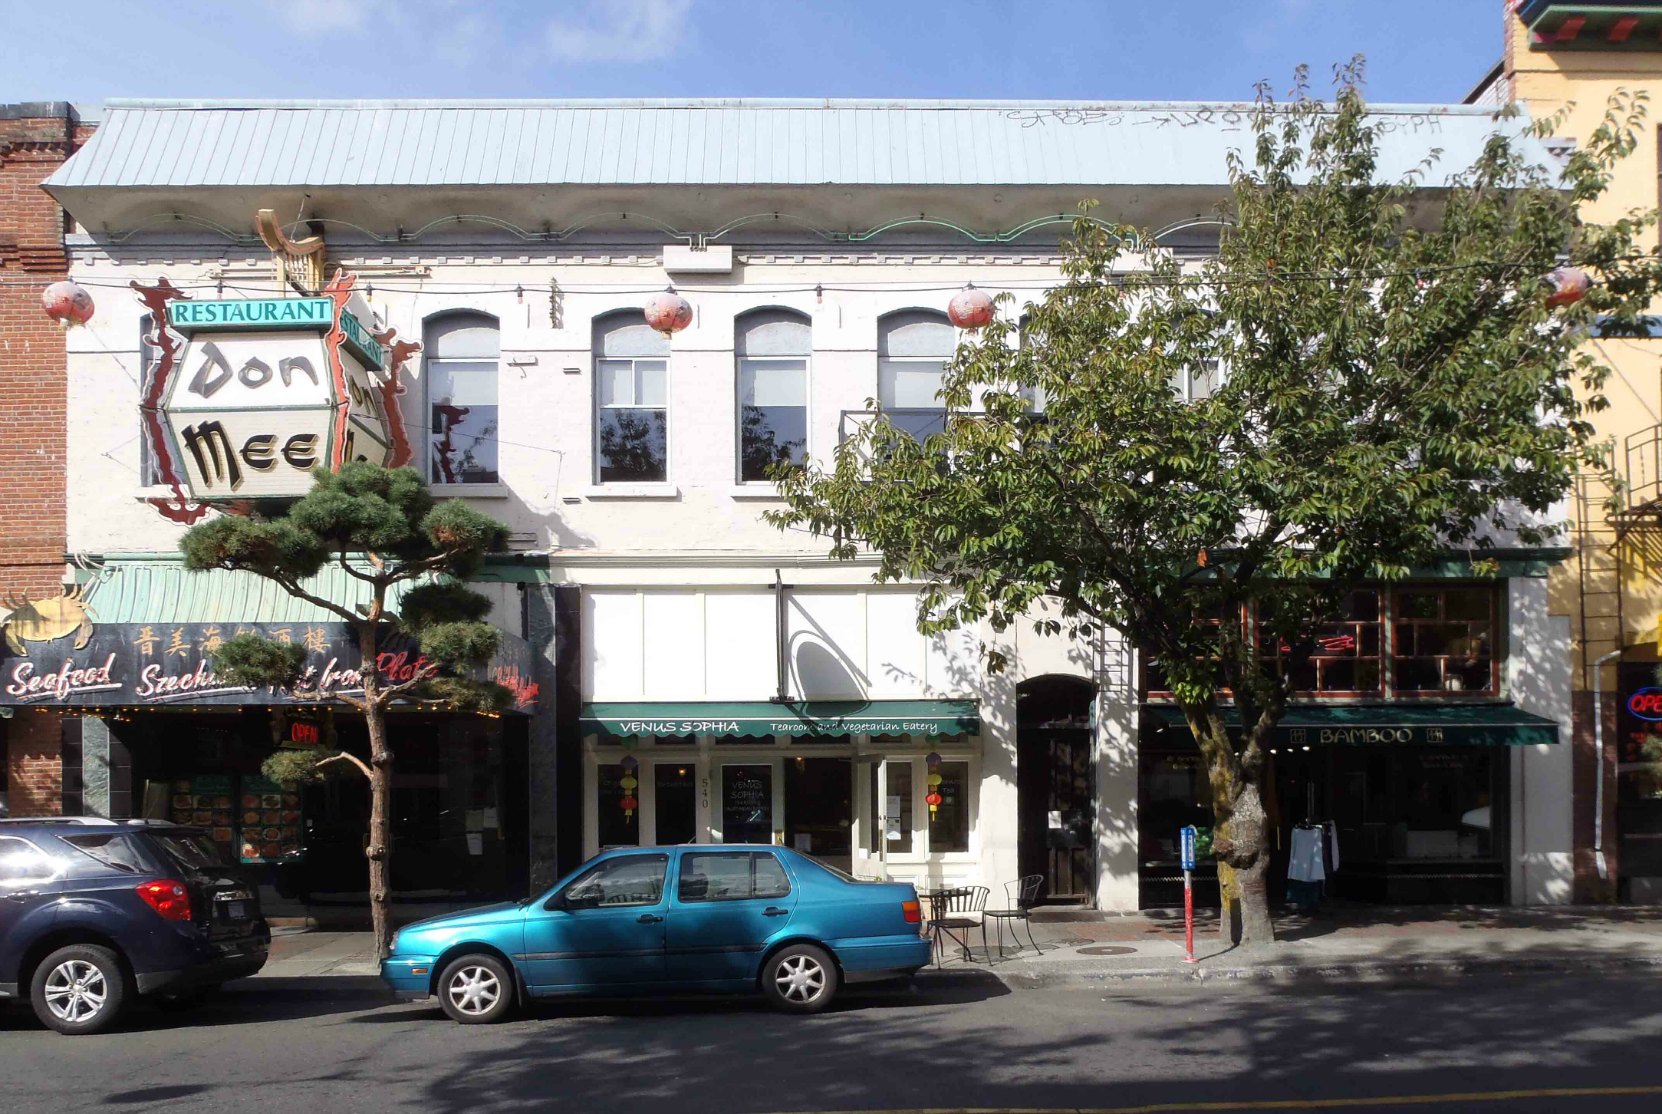 On Hing Building, 538-544 Fisgard Street, built in 1891 (photo by Victoria Online Sightseeing Tours)